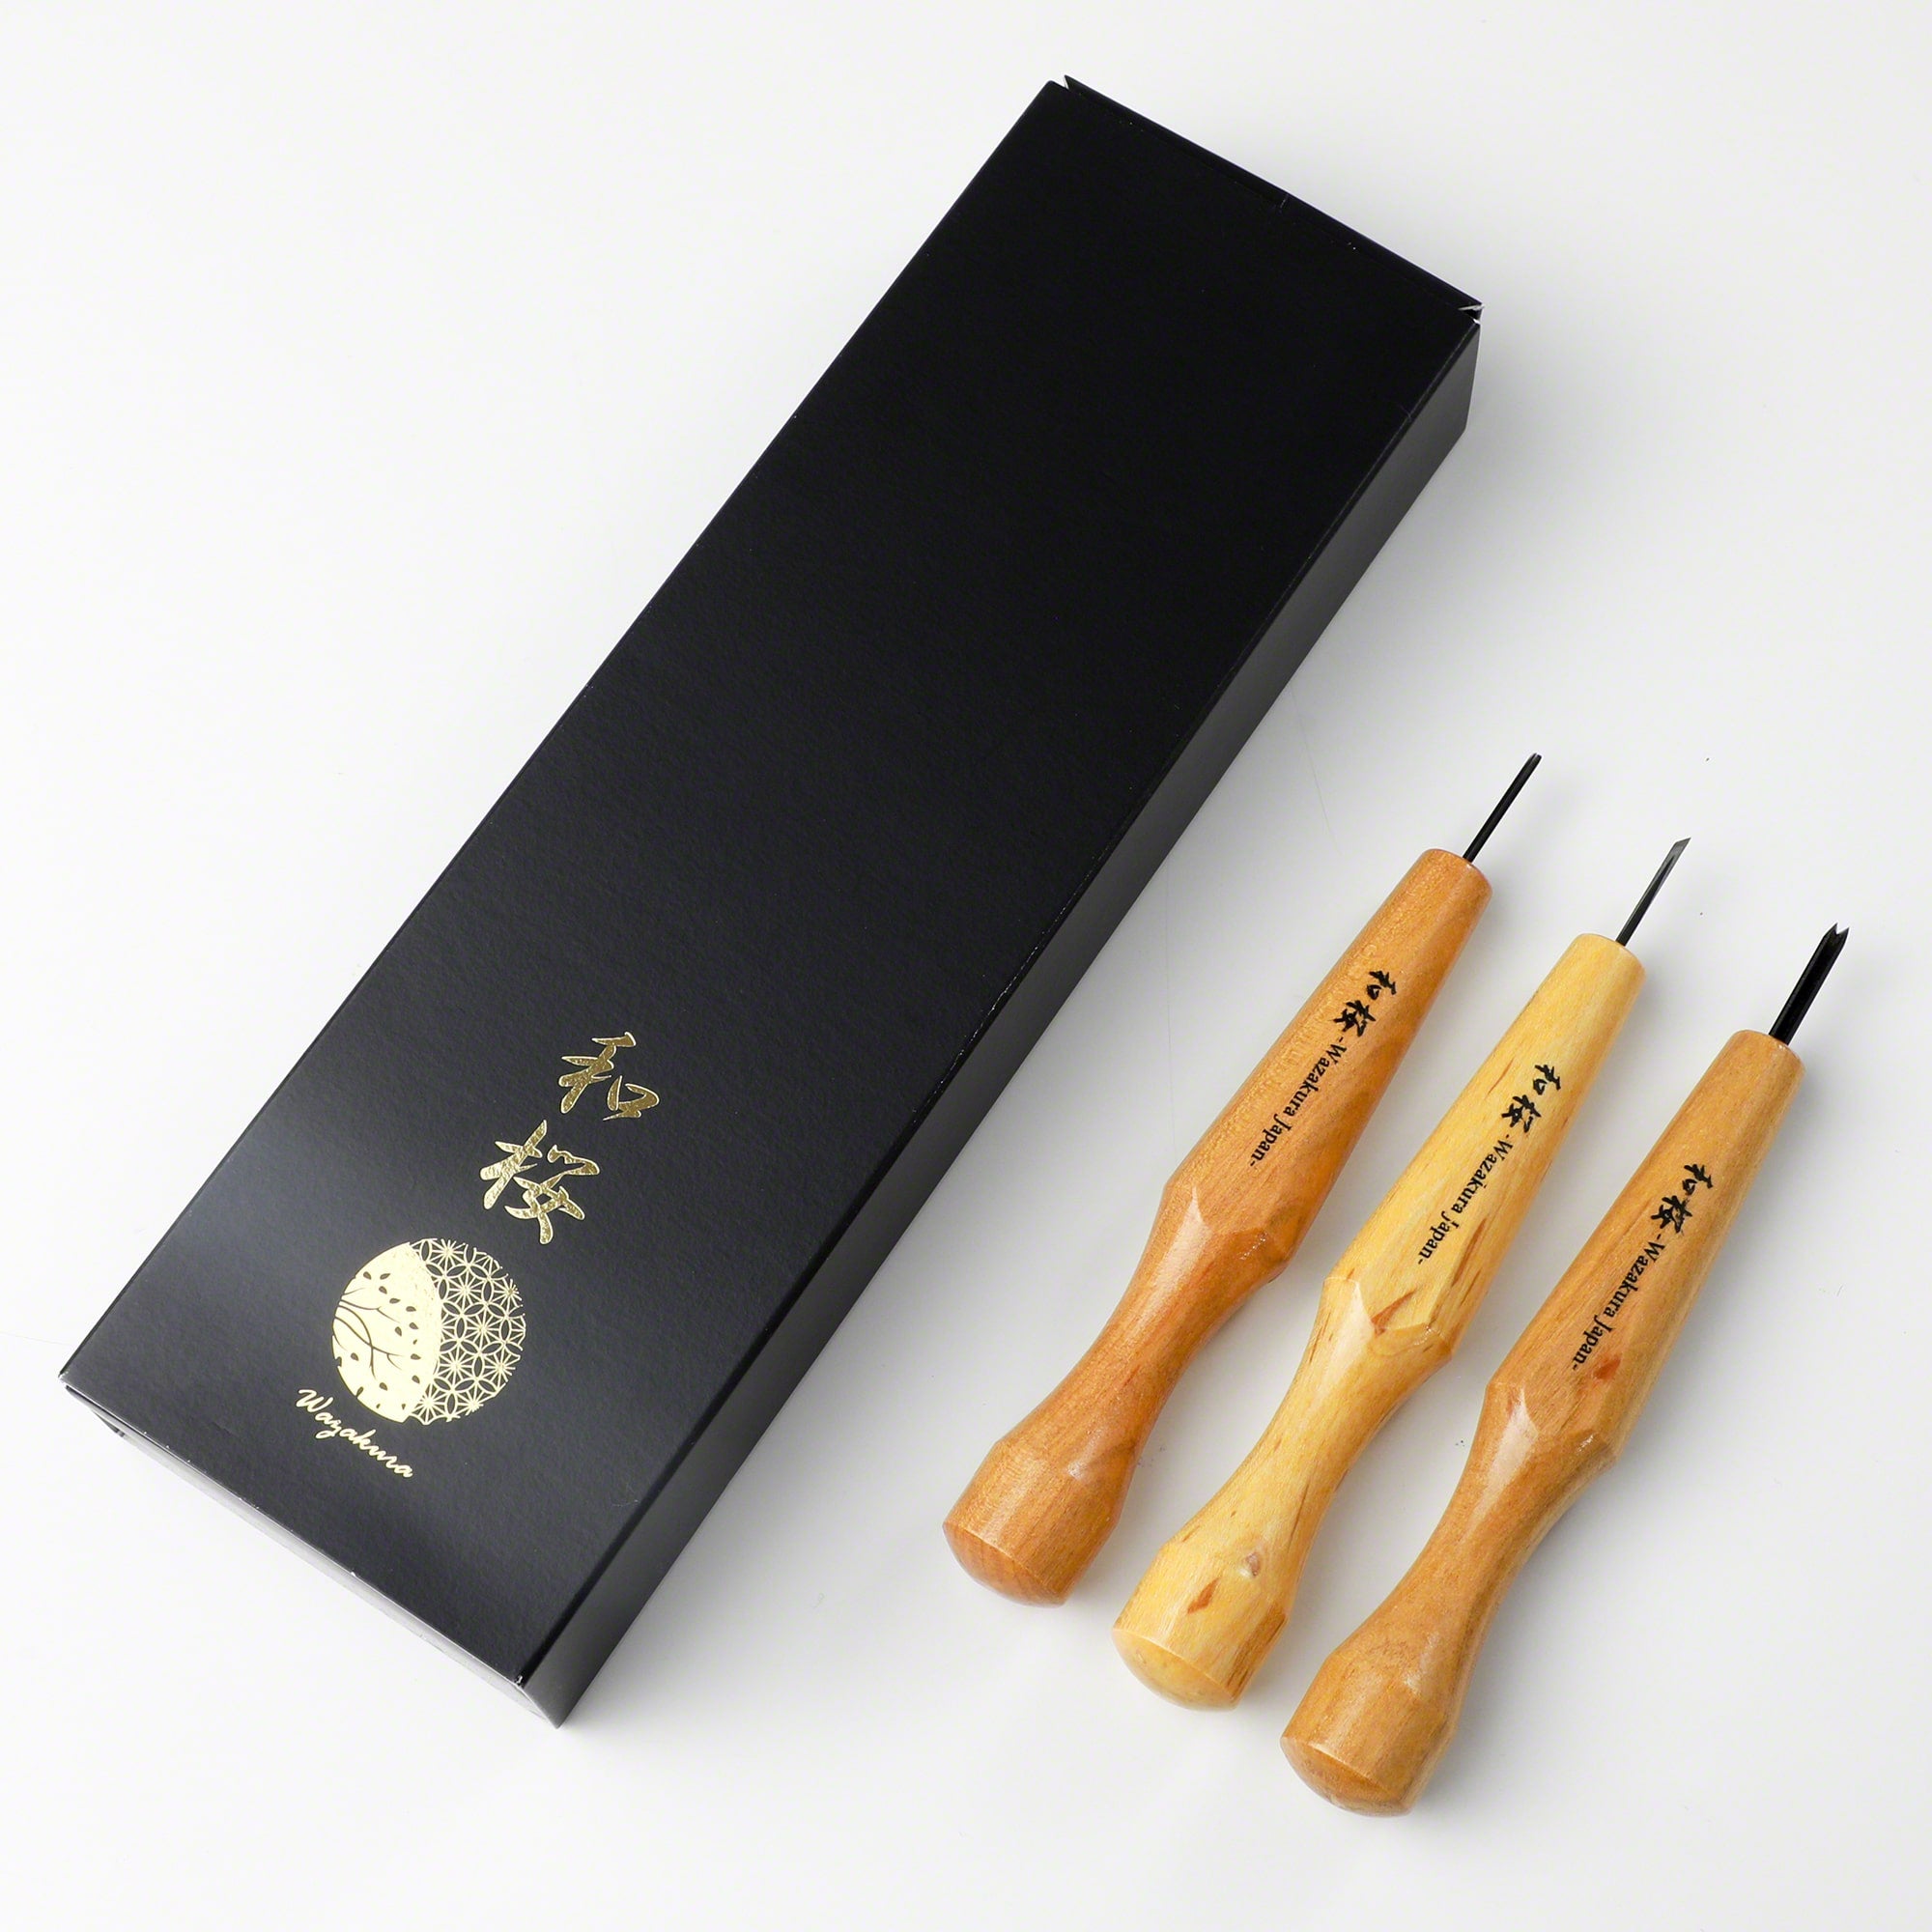 3pcs Woodworking Chisel Kit 1/2Inch (1.5mm), Made in Japan